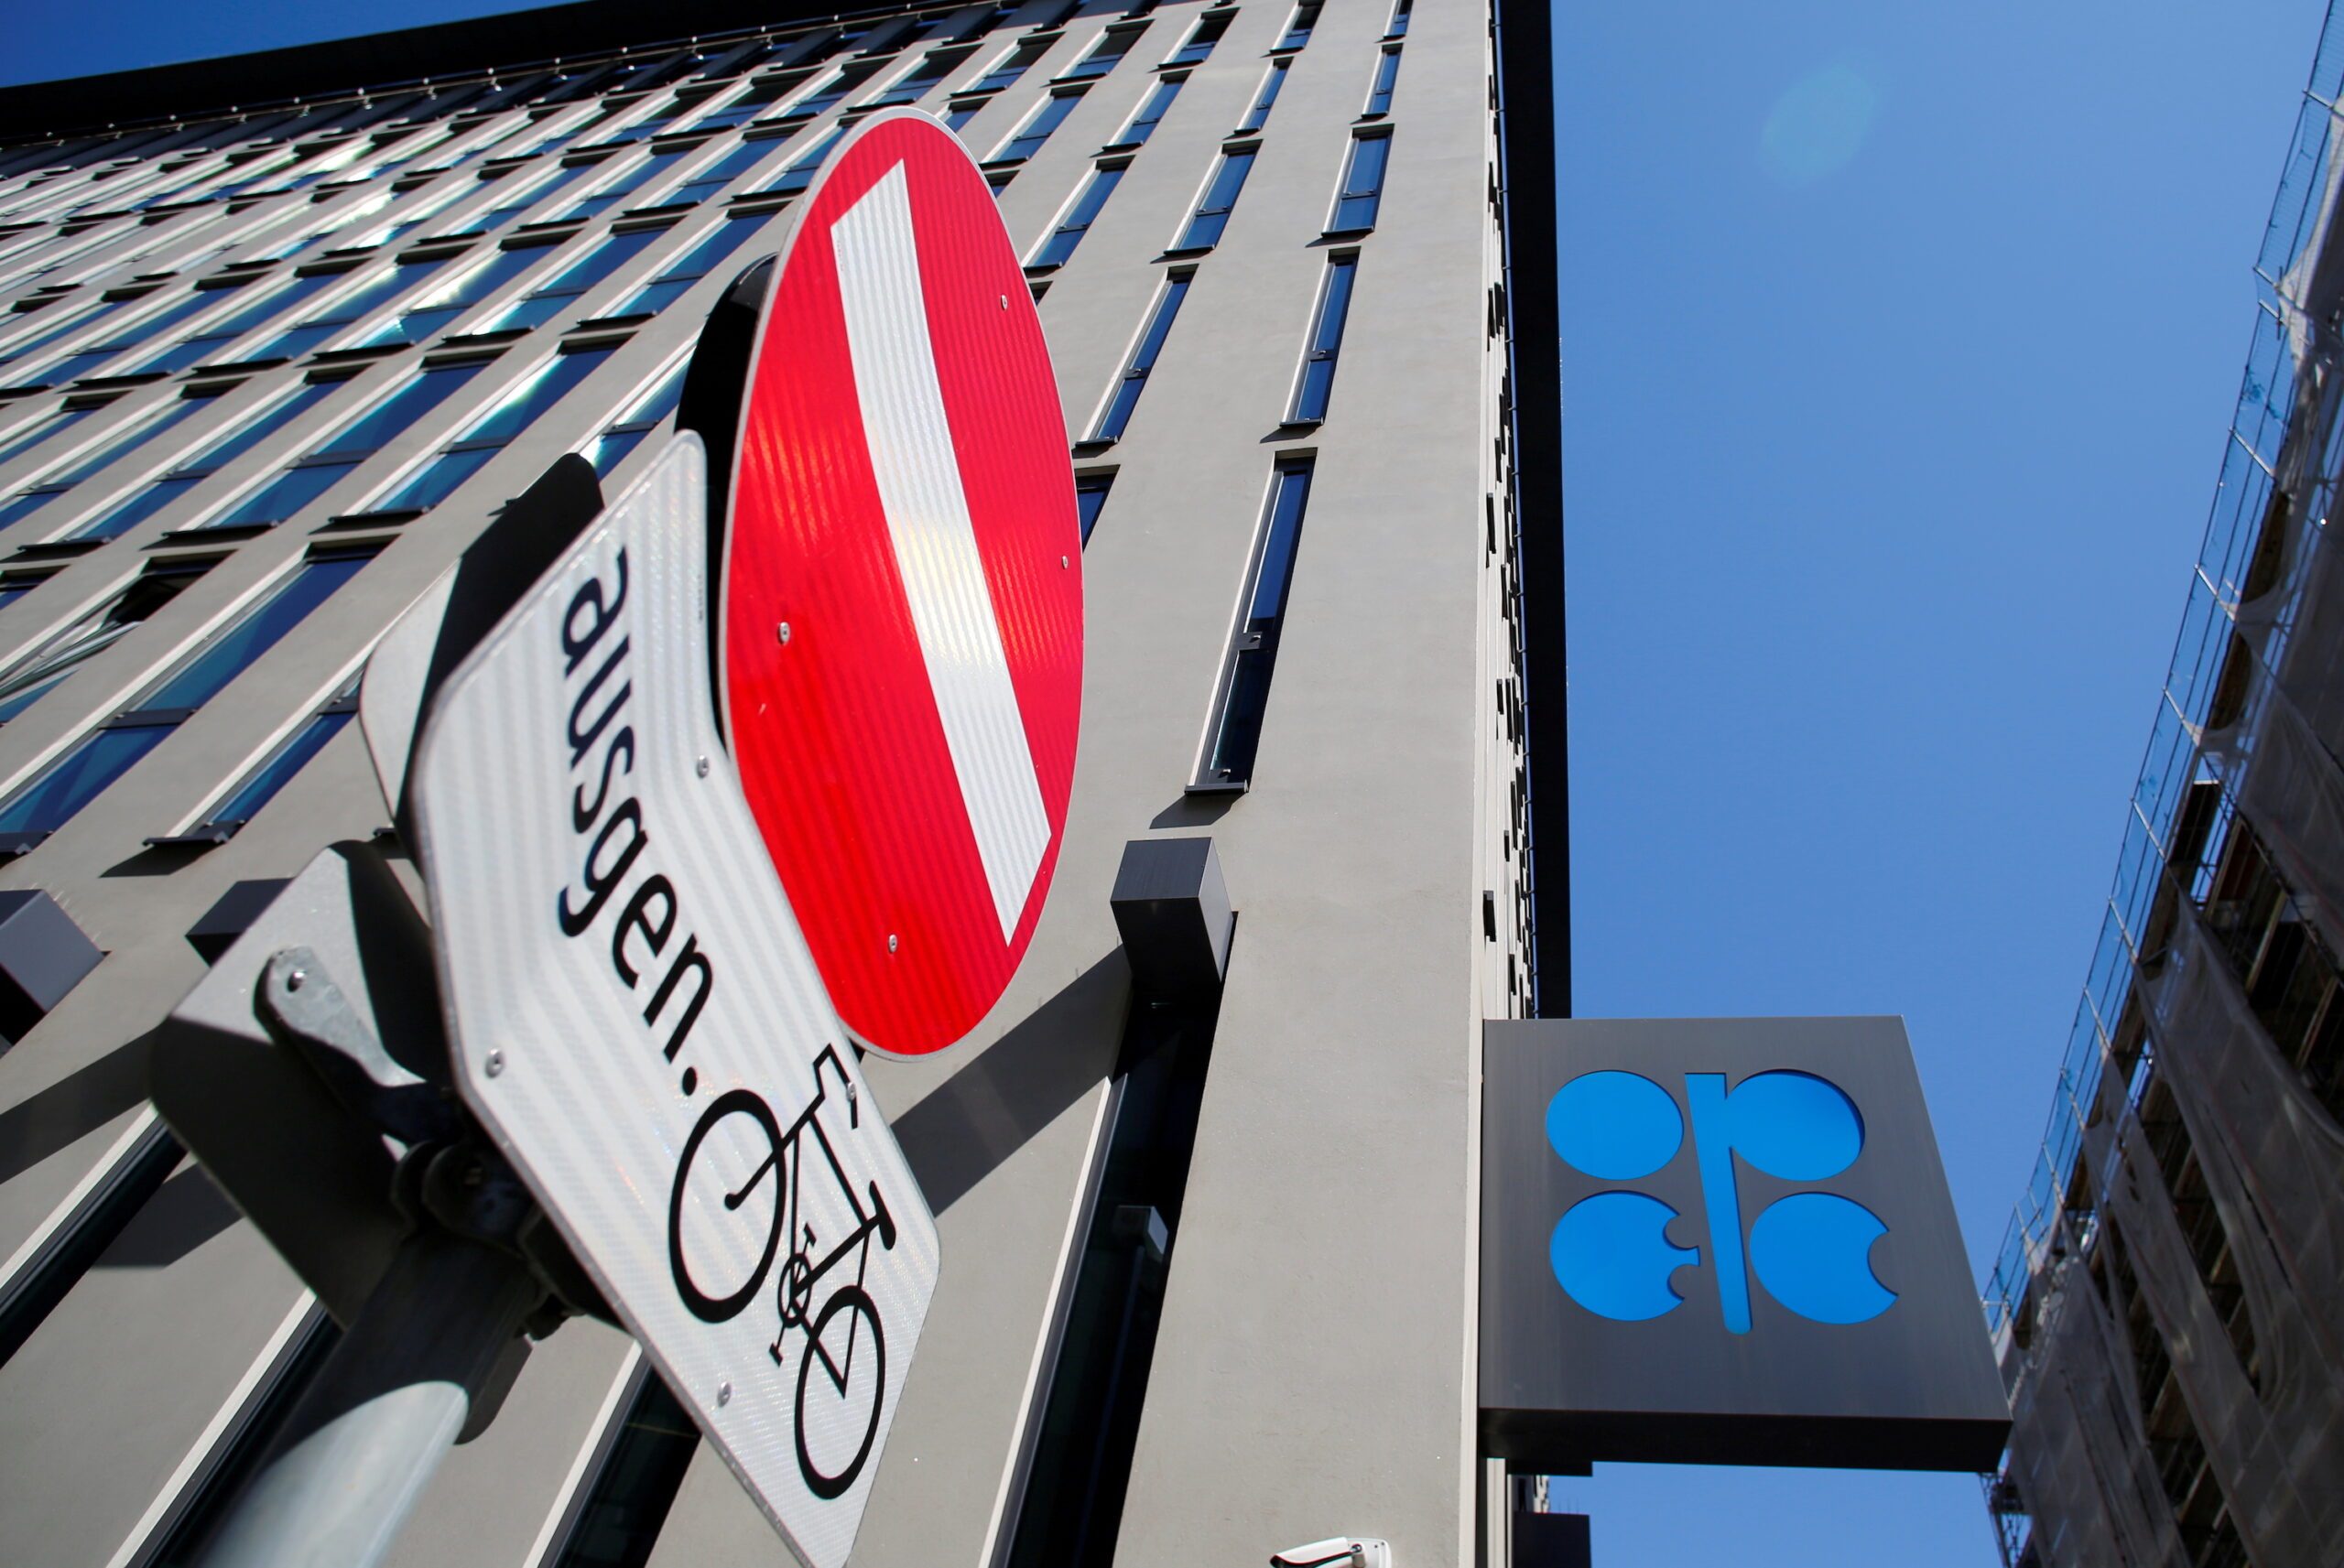 OPEC+ weighs output policy amid oil price slide, Omicron fears